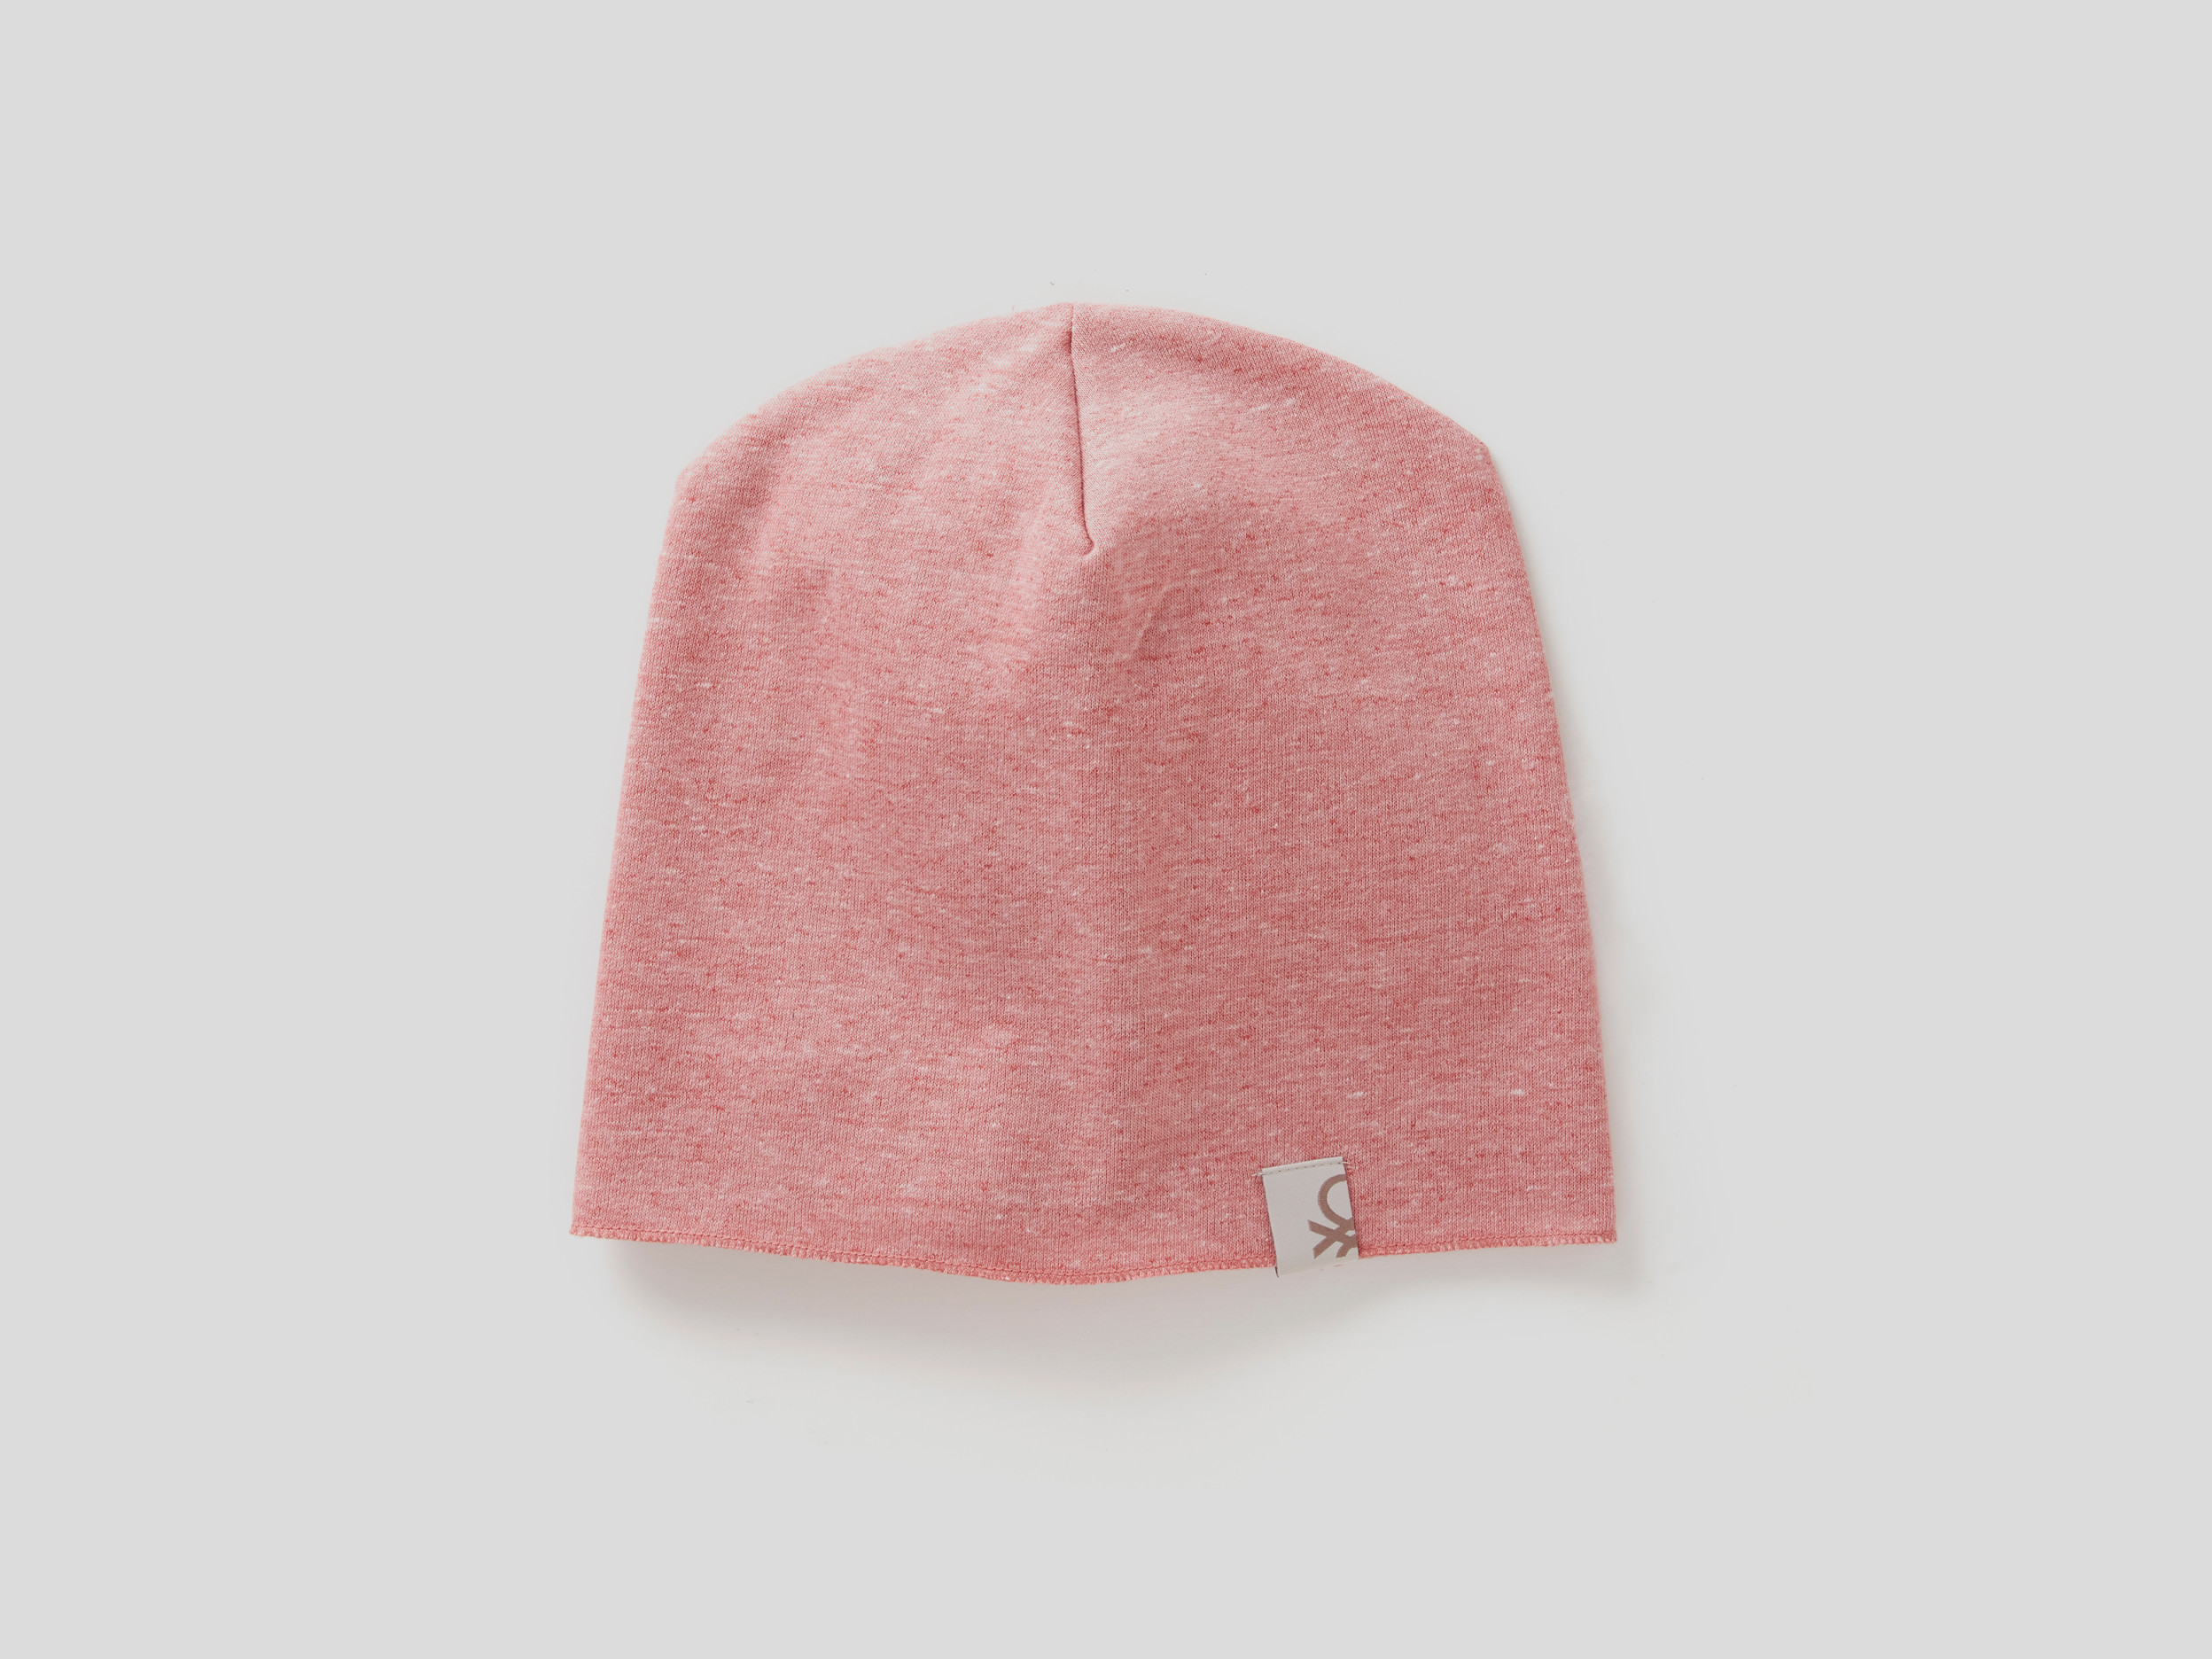 benetton, cap in recycled fabric, size s, pink, kids